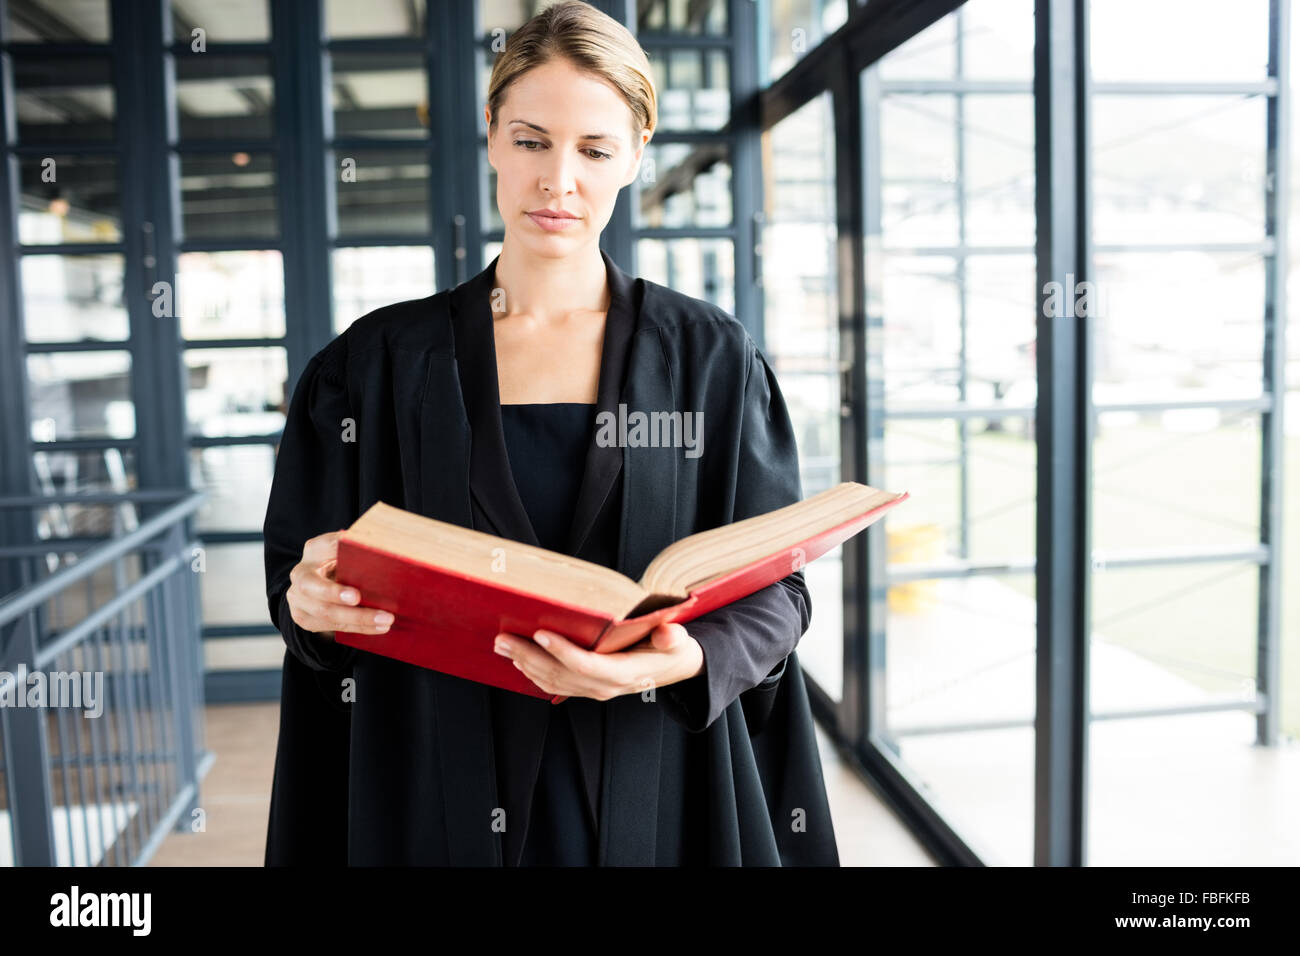 Female lawyer reading a book attentively Stock Photo